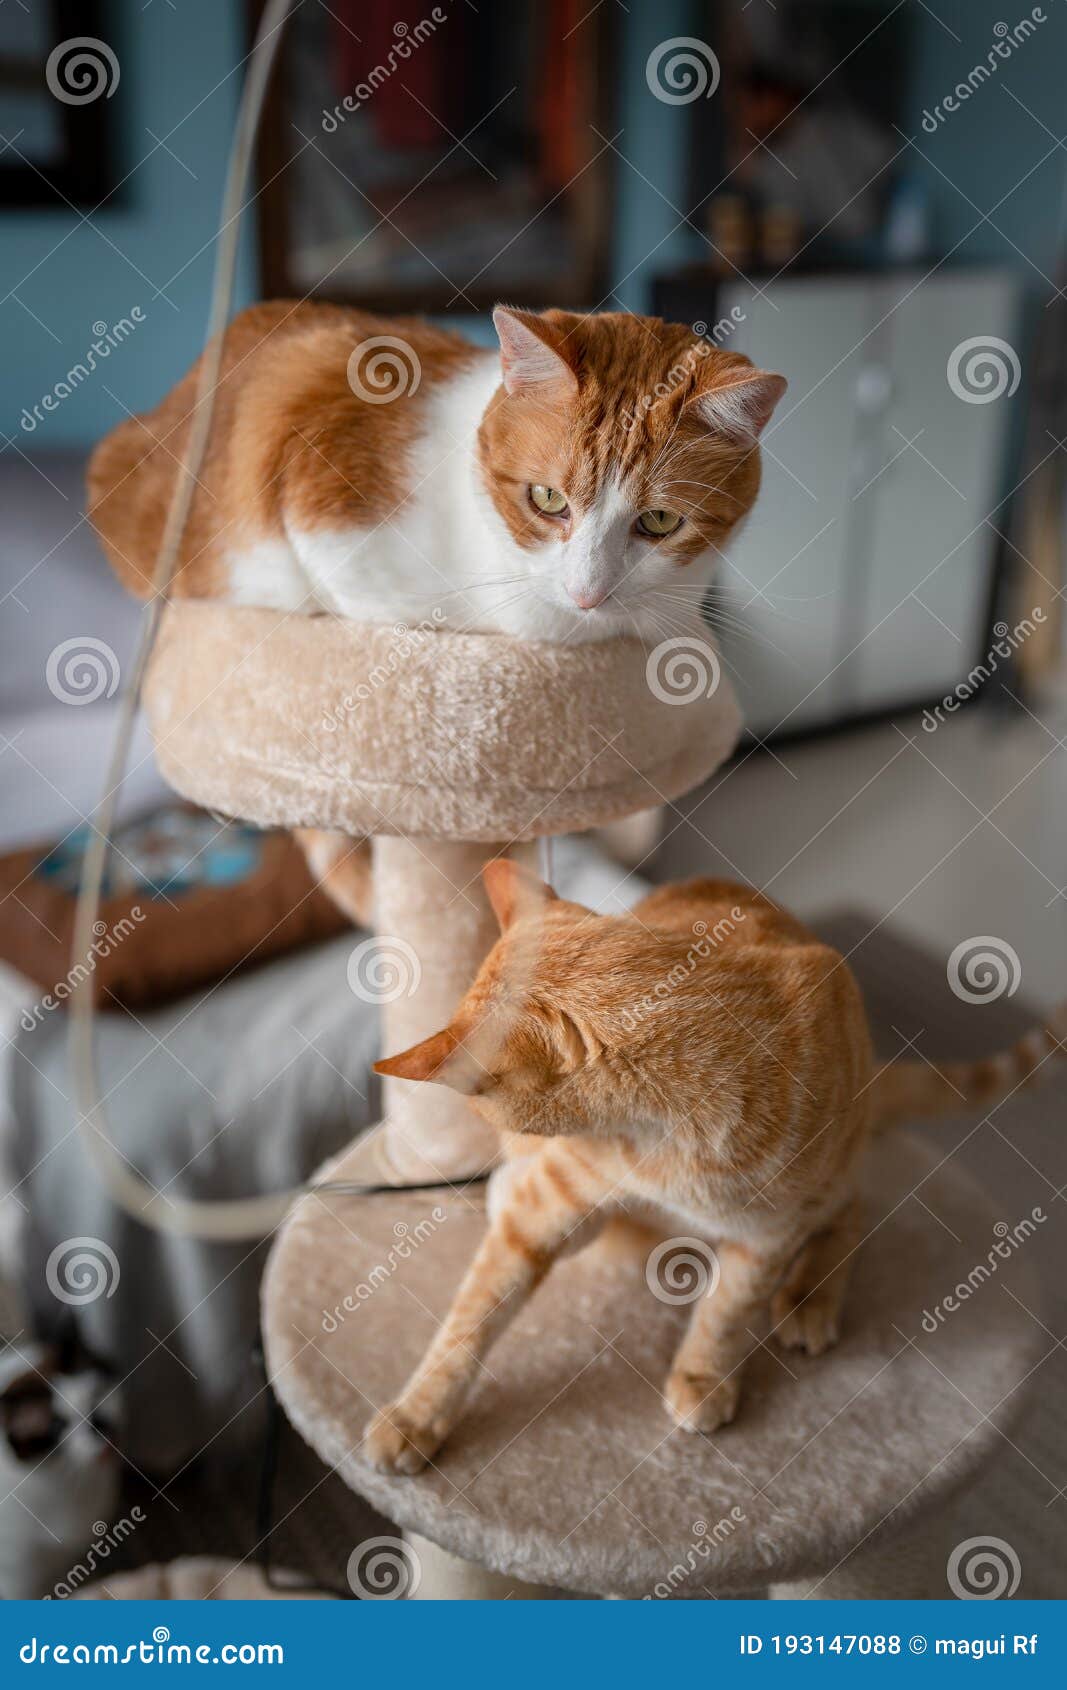 vertical composition. two brown cats play in a scratching tower